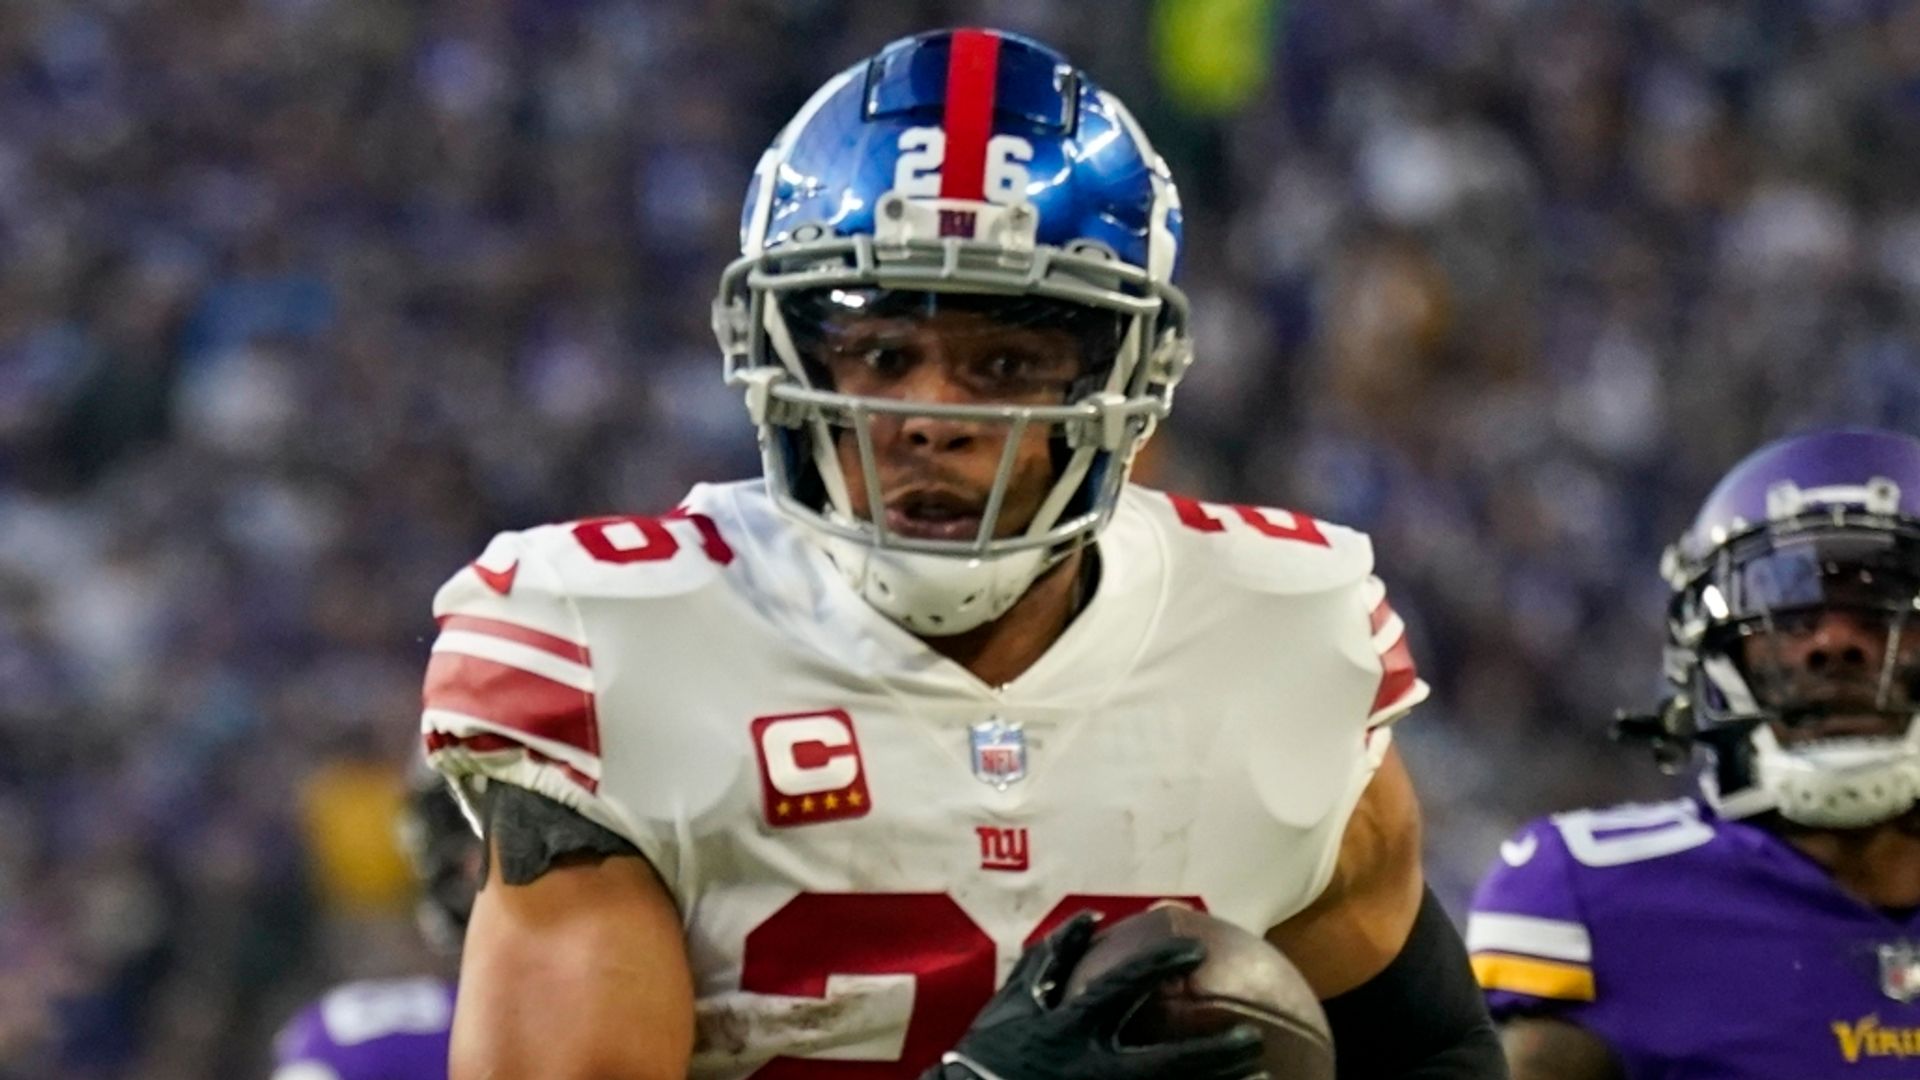 NFL playoffs: Giants beat Vikings to set up Eagles clash LIVE!